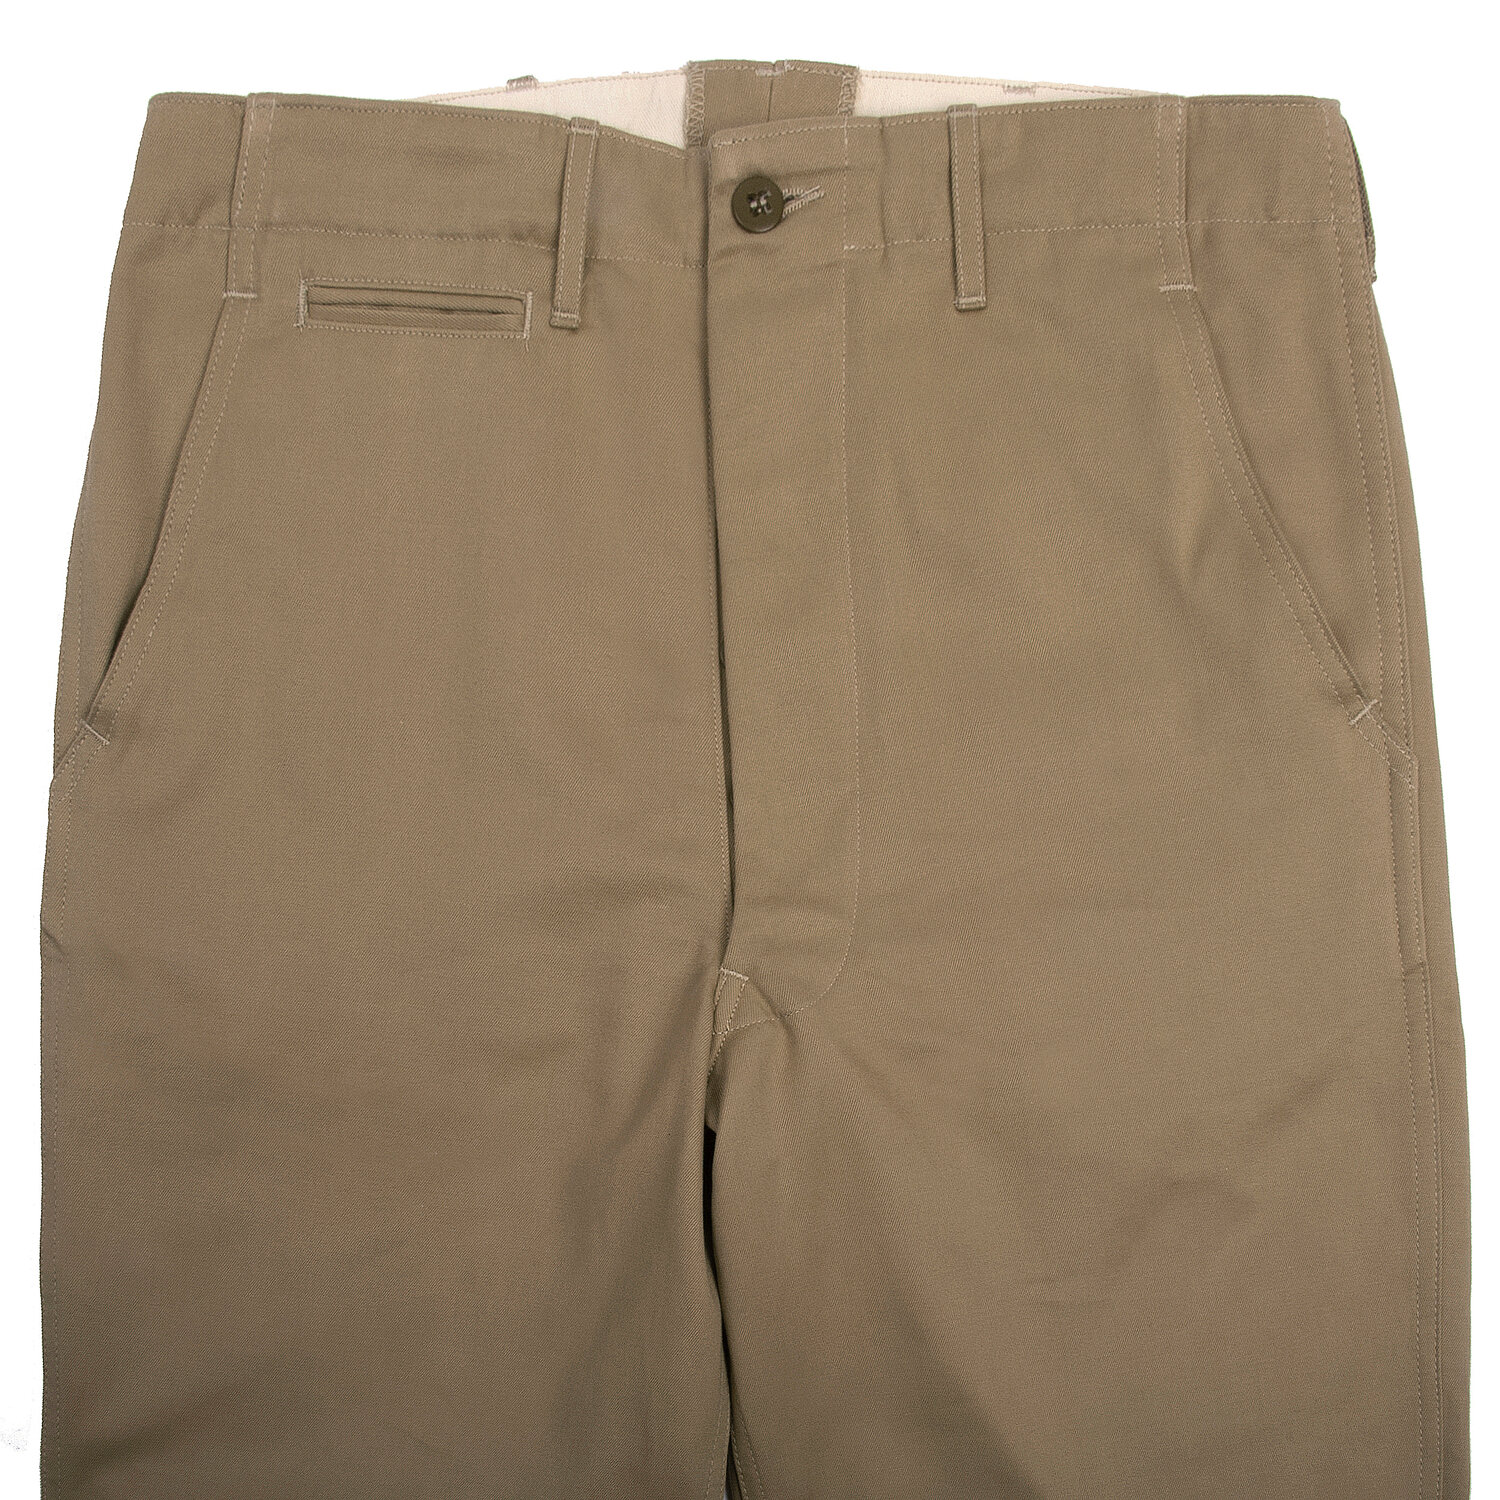 SM Wholesale USA — Our NEW US WWII Khaki Service Trousers